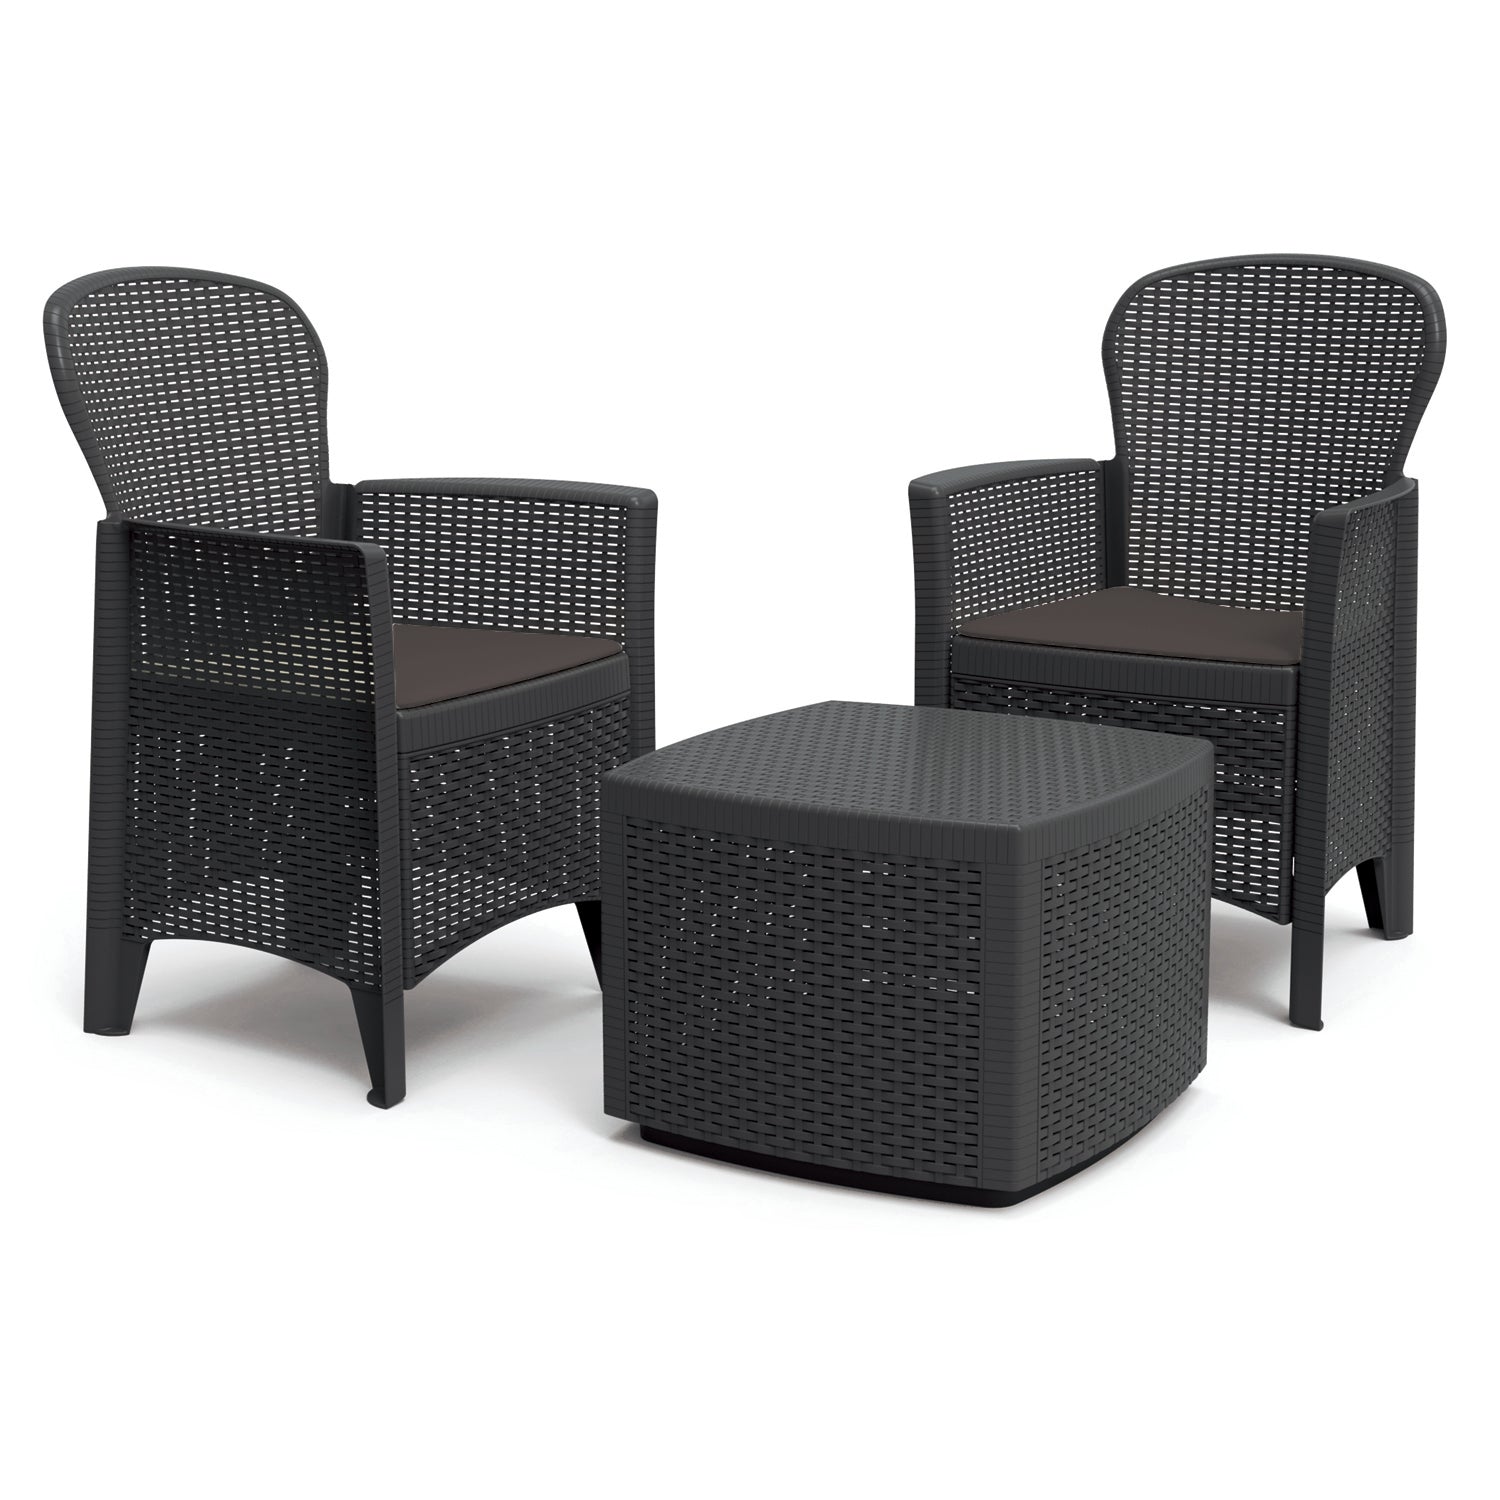 Trabella Sicily Side Table with 2 Sicily Chairs Set Anthracite Dining Sets Trabella   